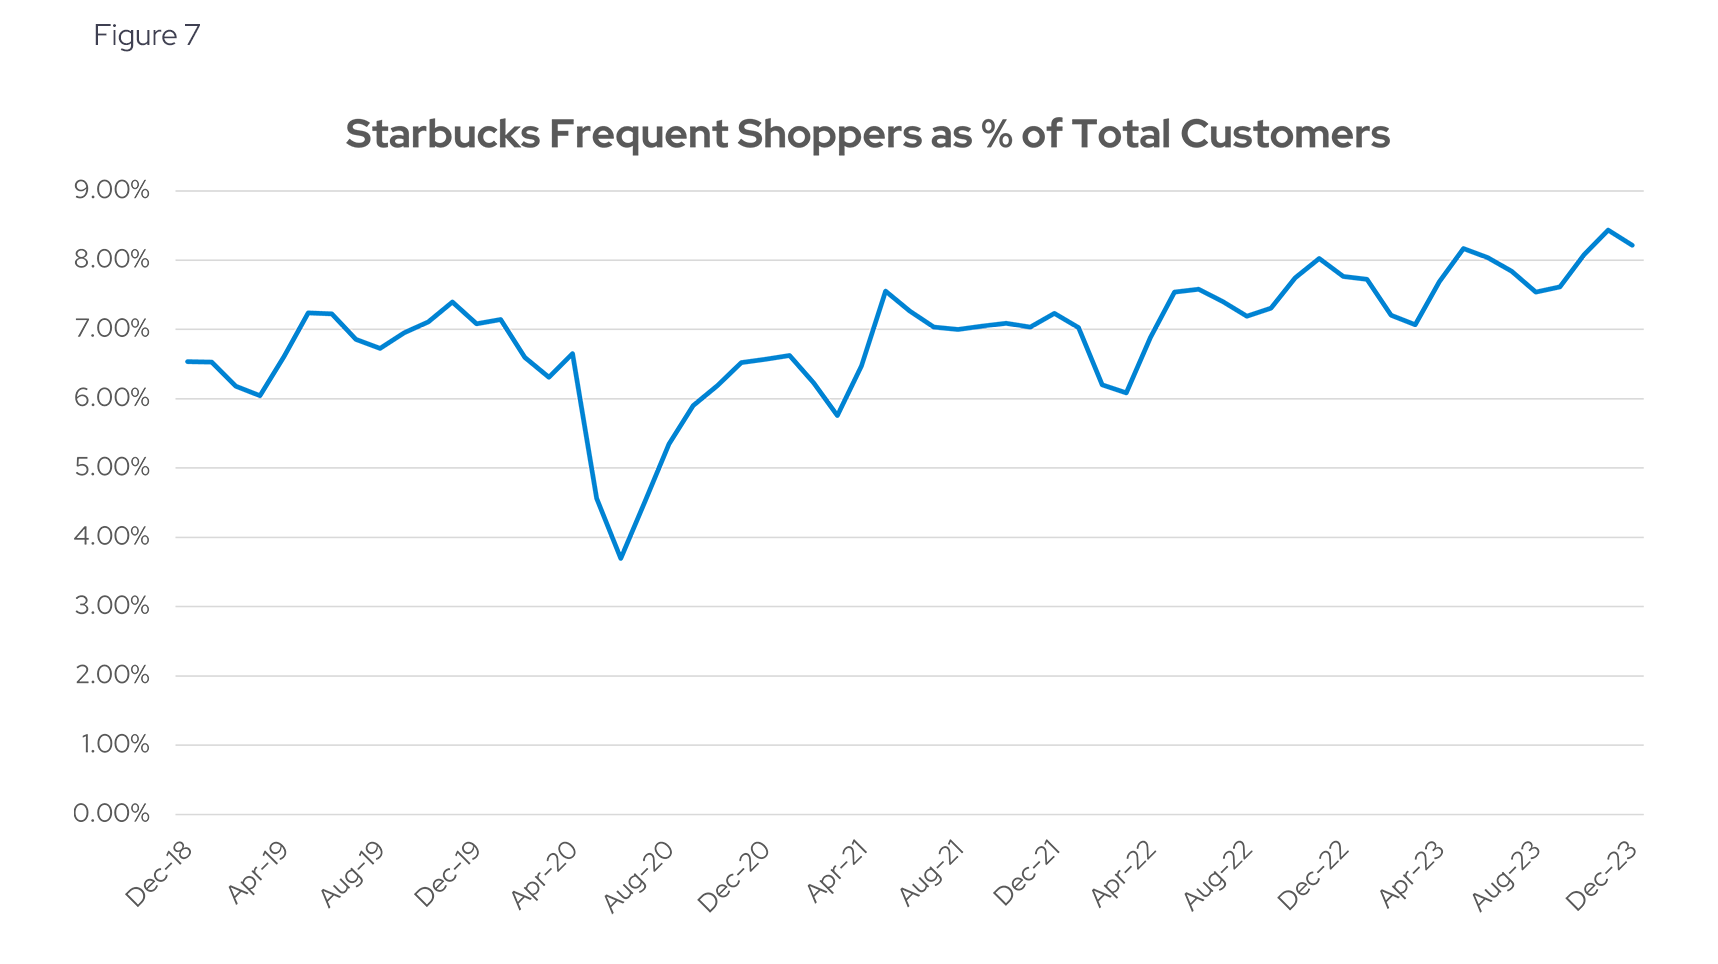 Starbucks Frequent Shoppers as % of Total Customers